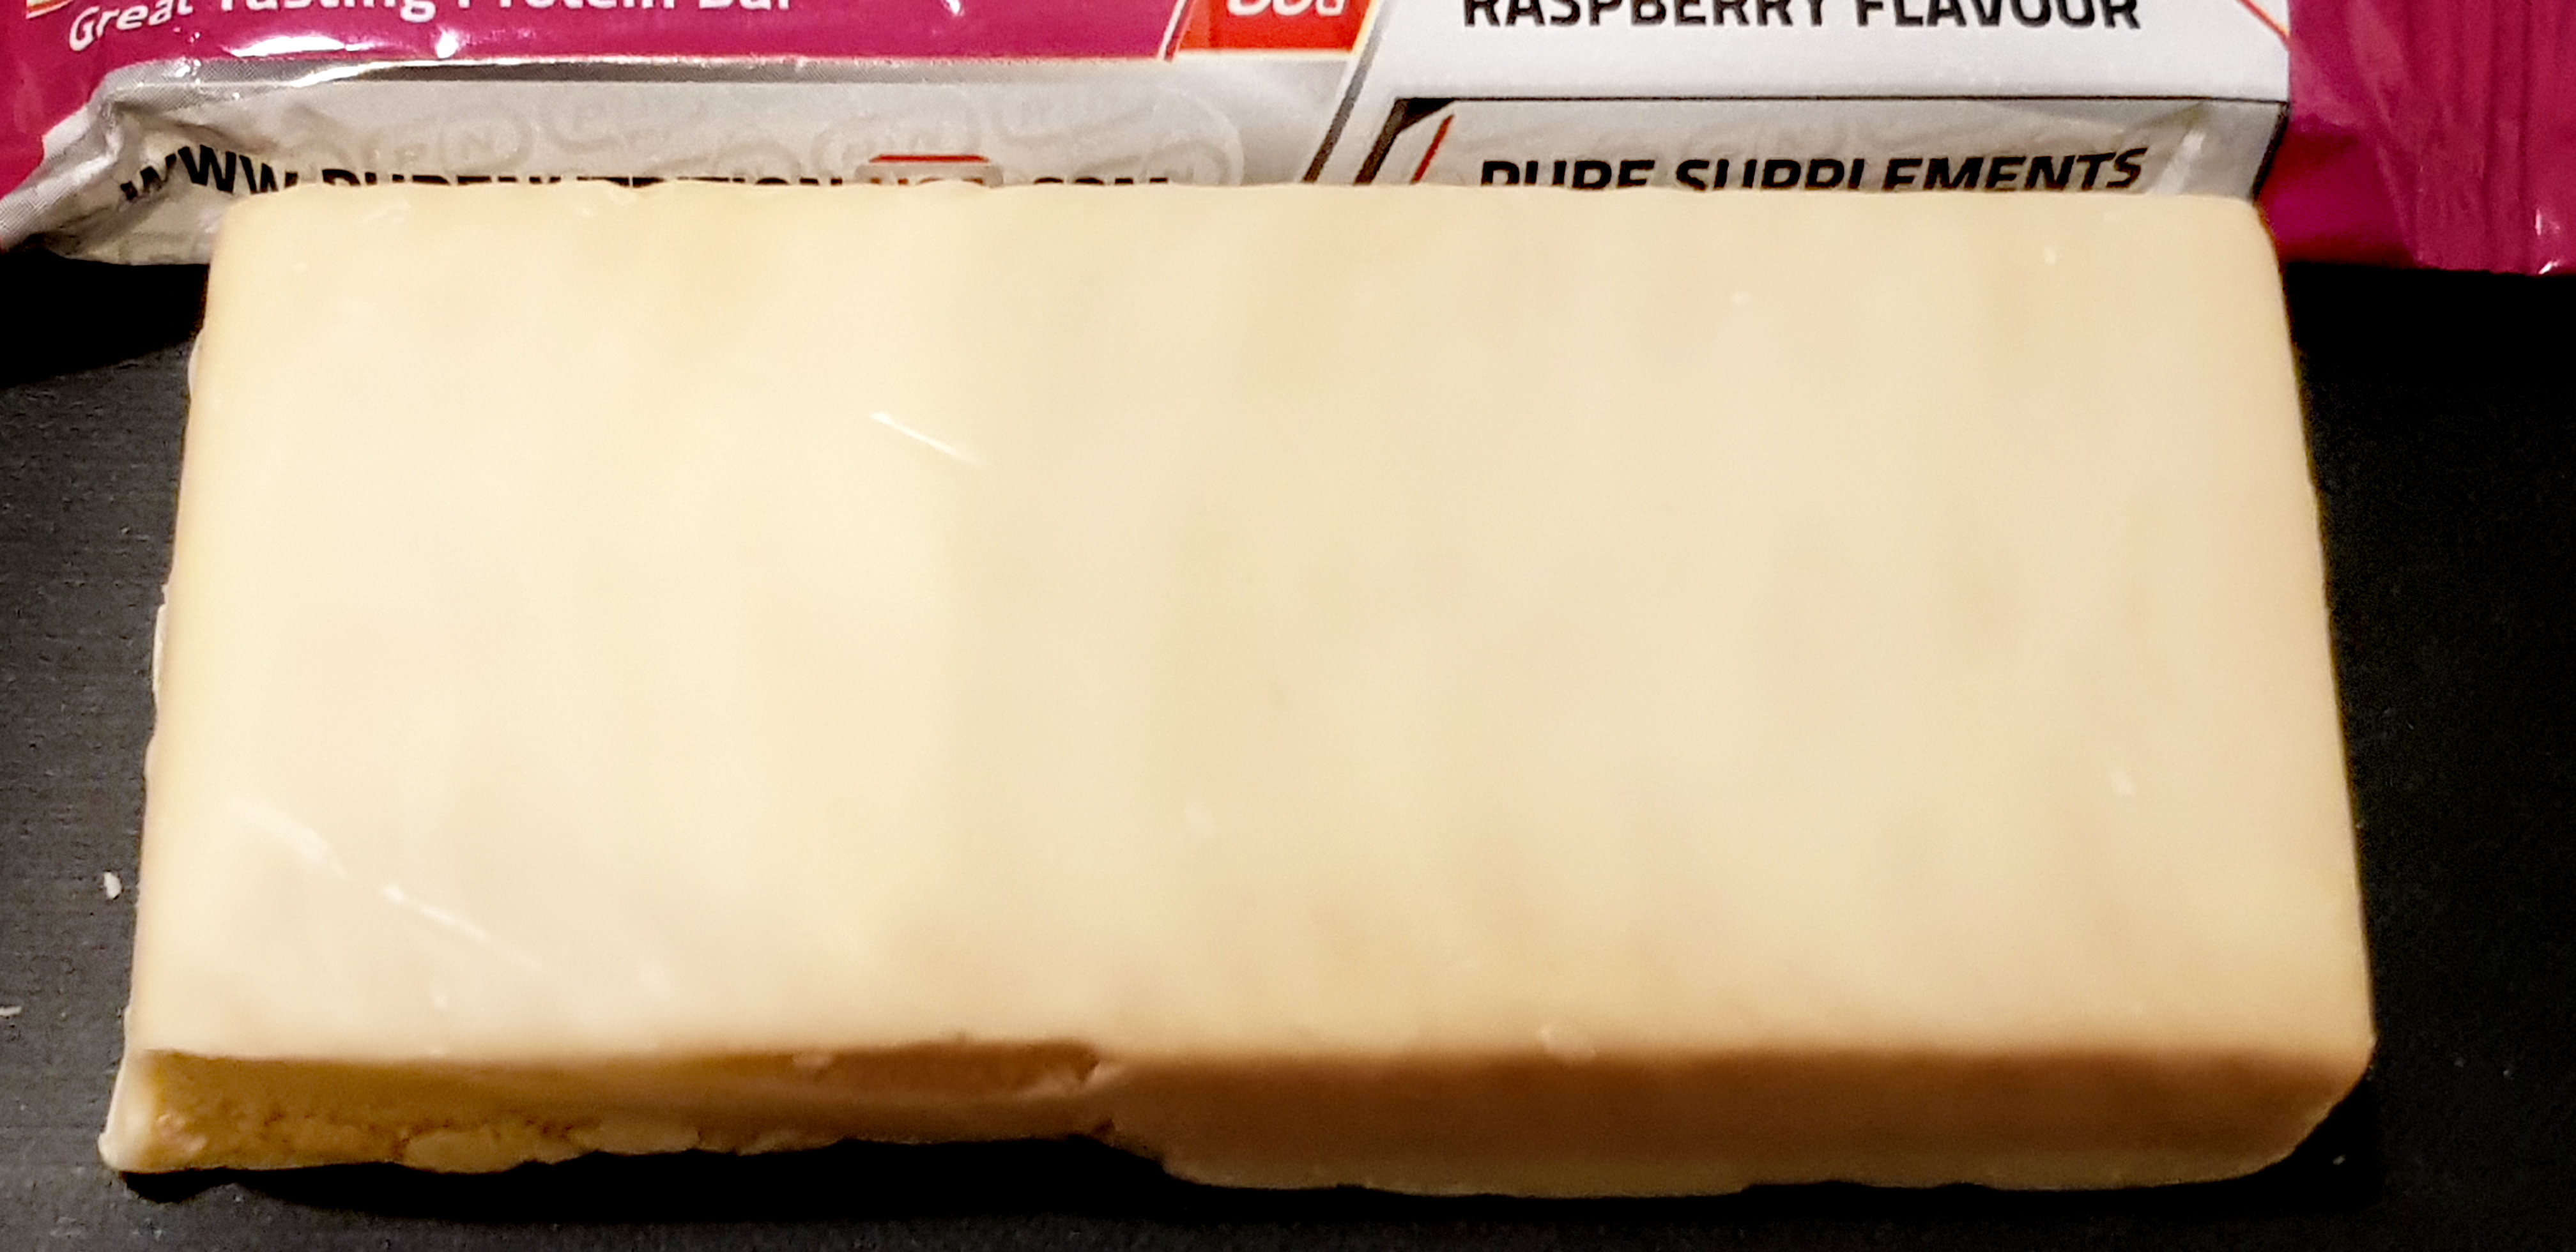 Pure Nutrition USA XL Protein Bar Raspberry review